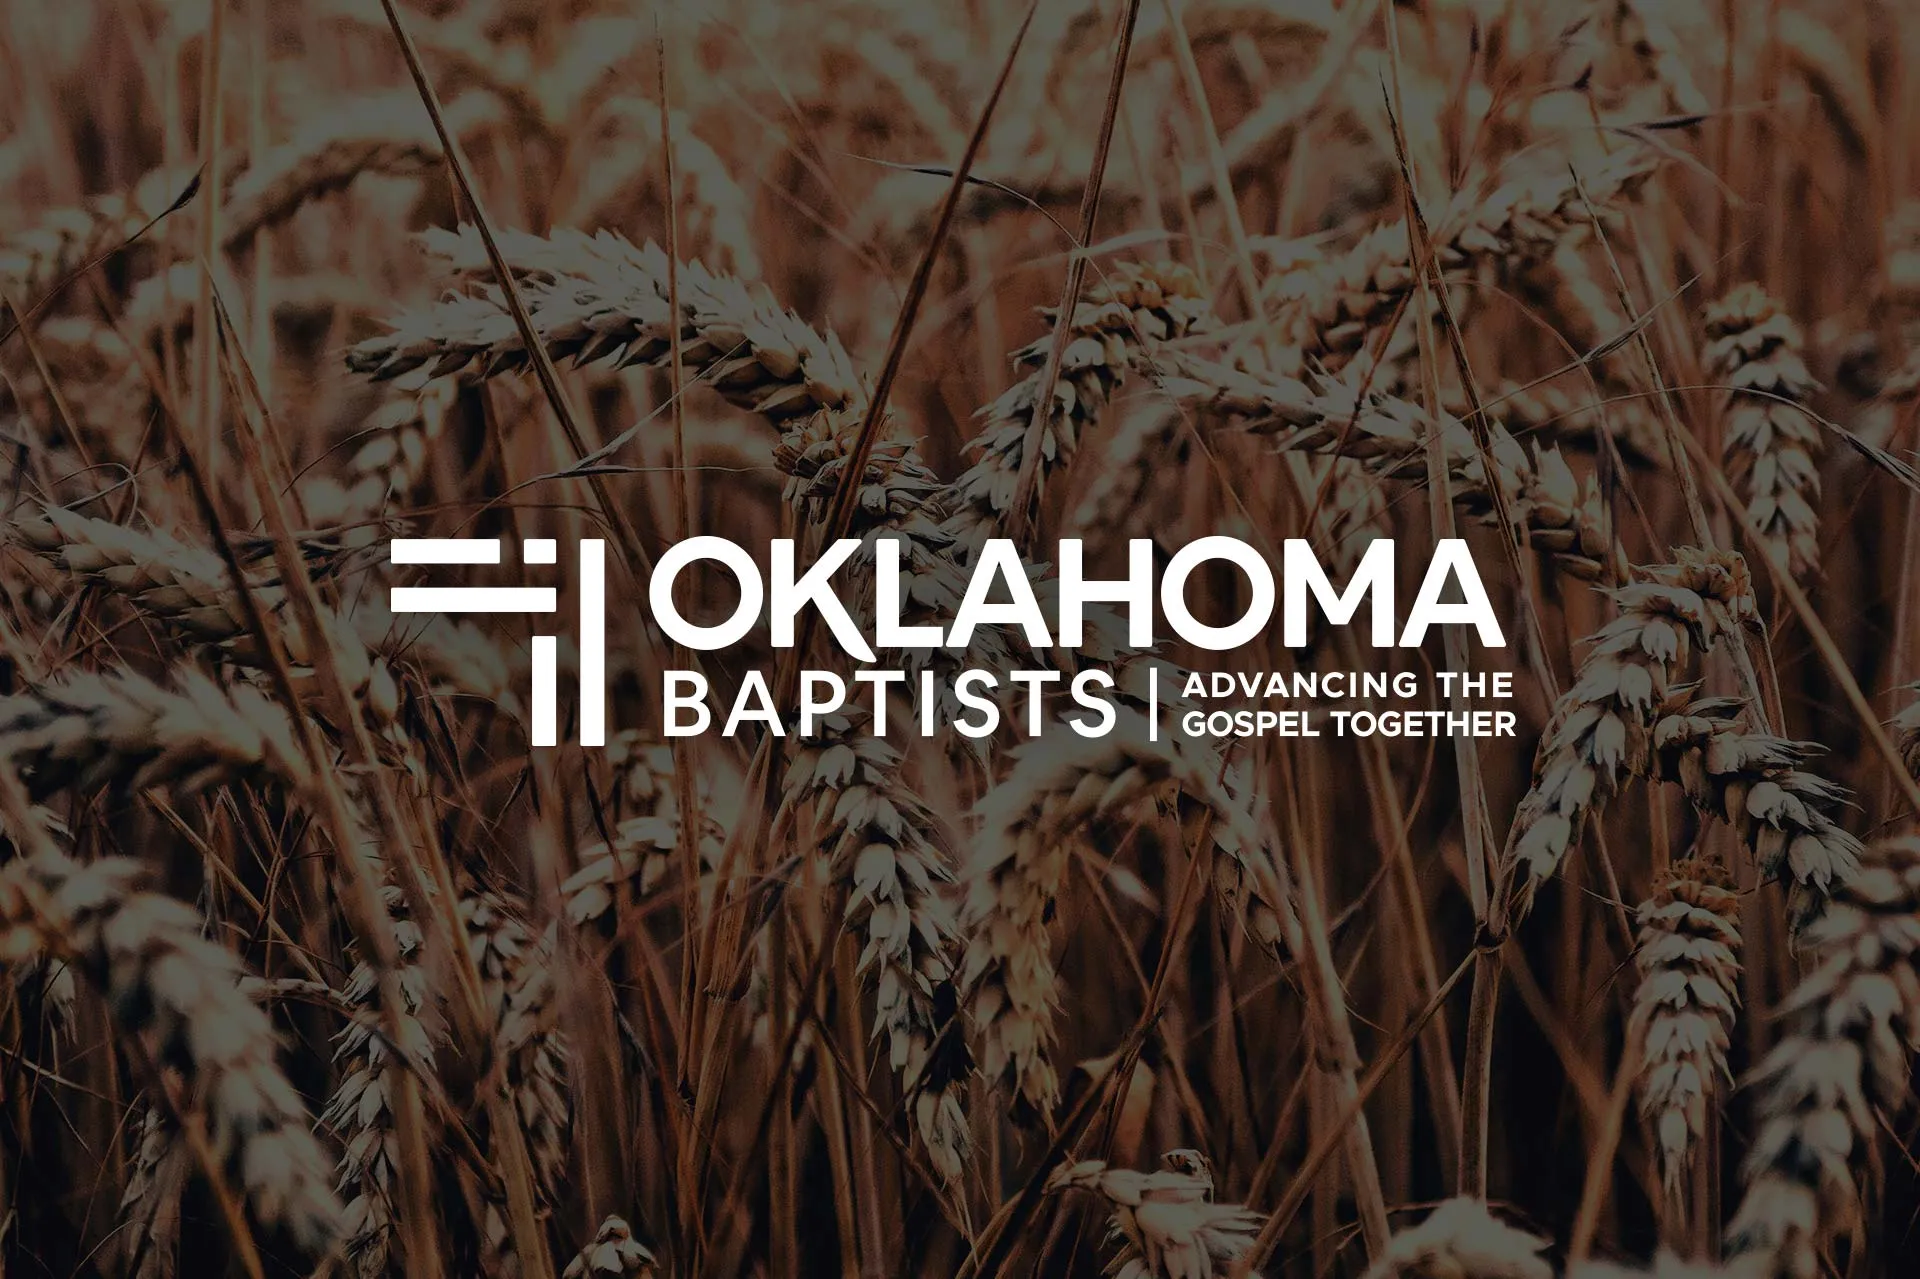 The Oklahoma Baptists logo over an image of wheat in an Oklahoma field.